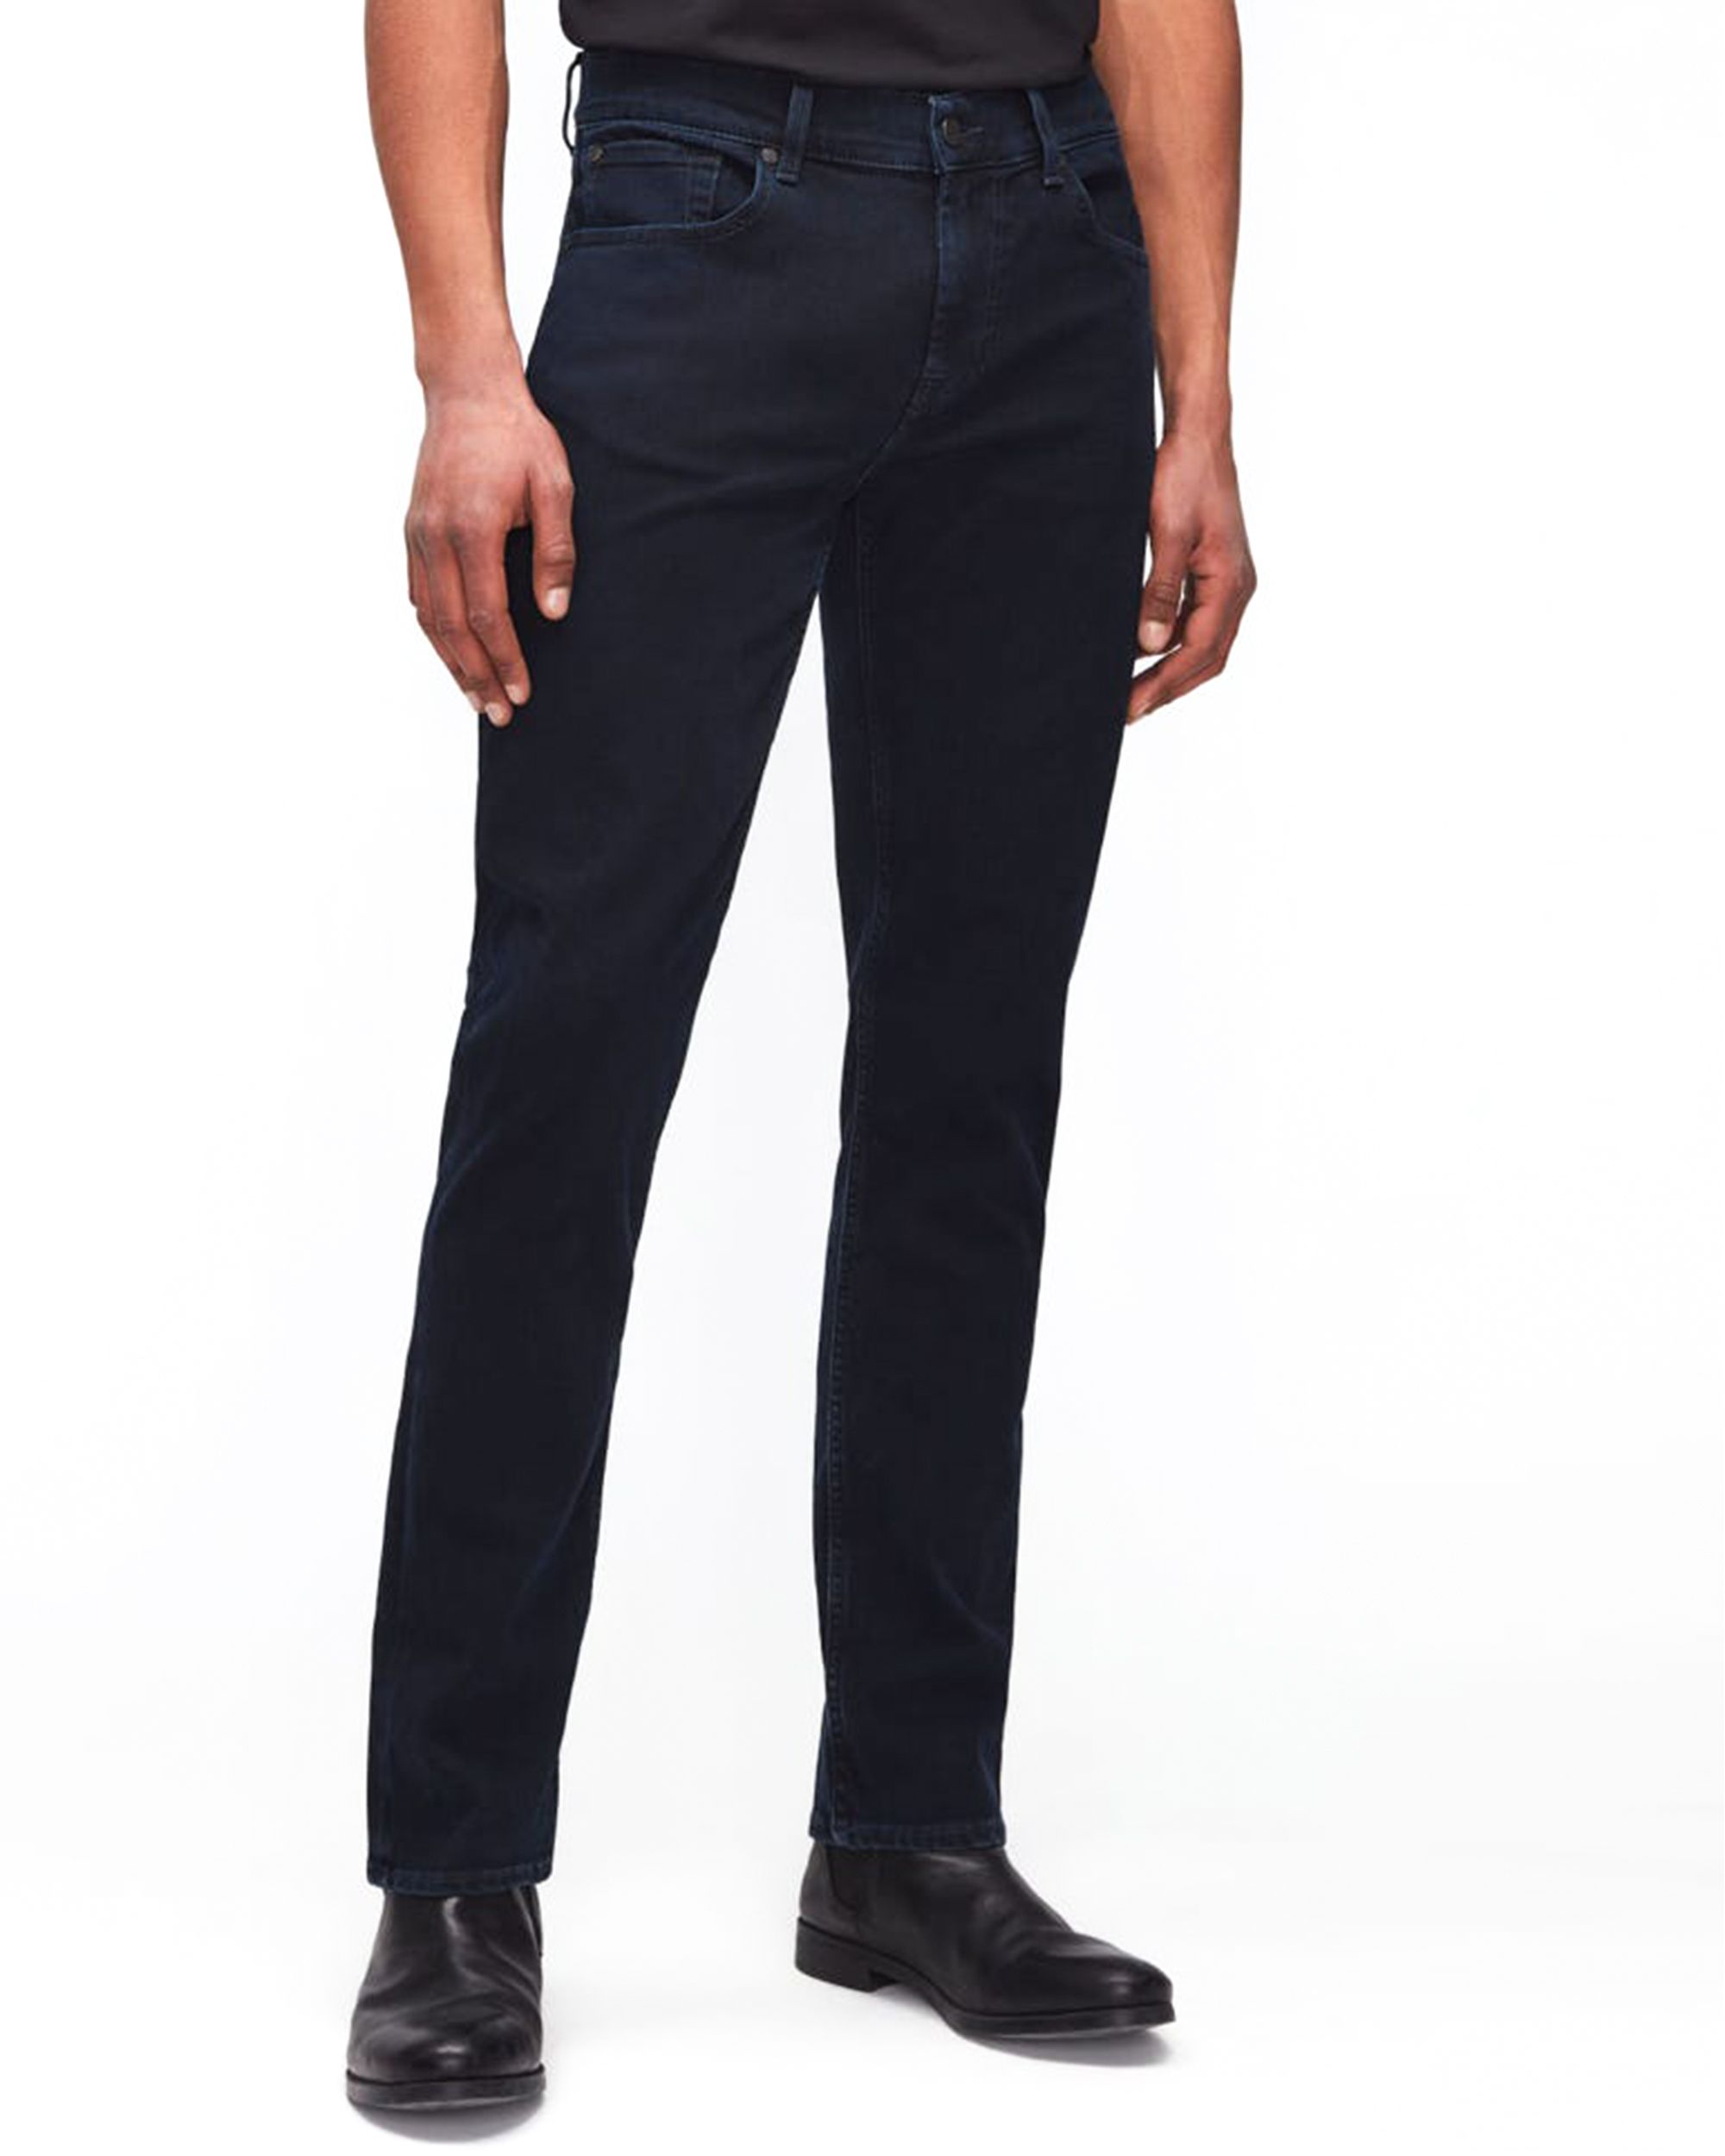 Seven for all mankind - Jeans Donker blauw 081445-001-30